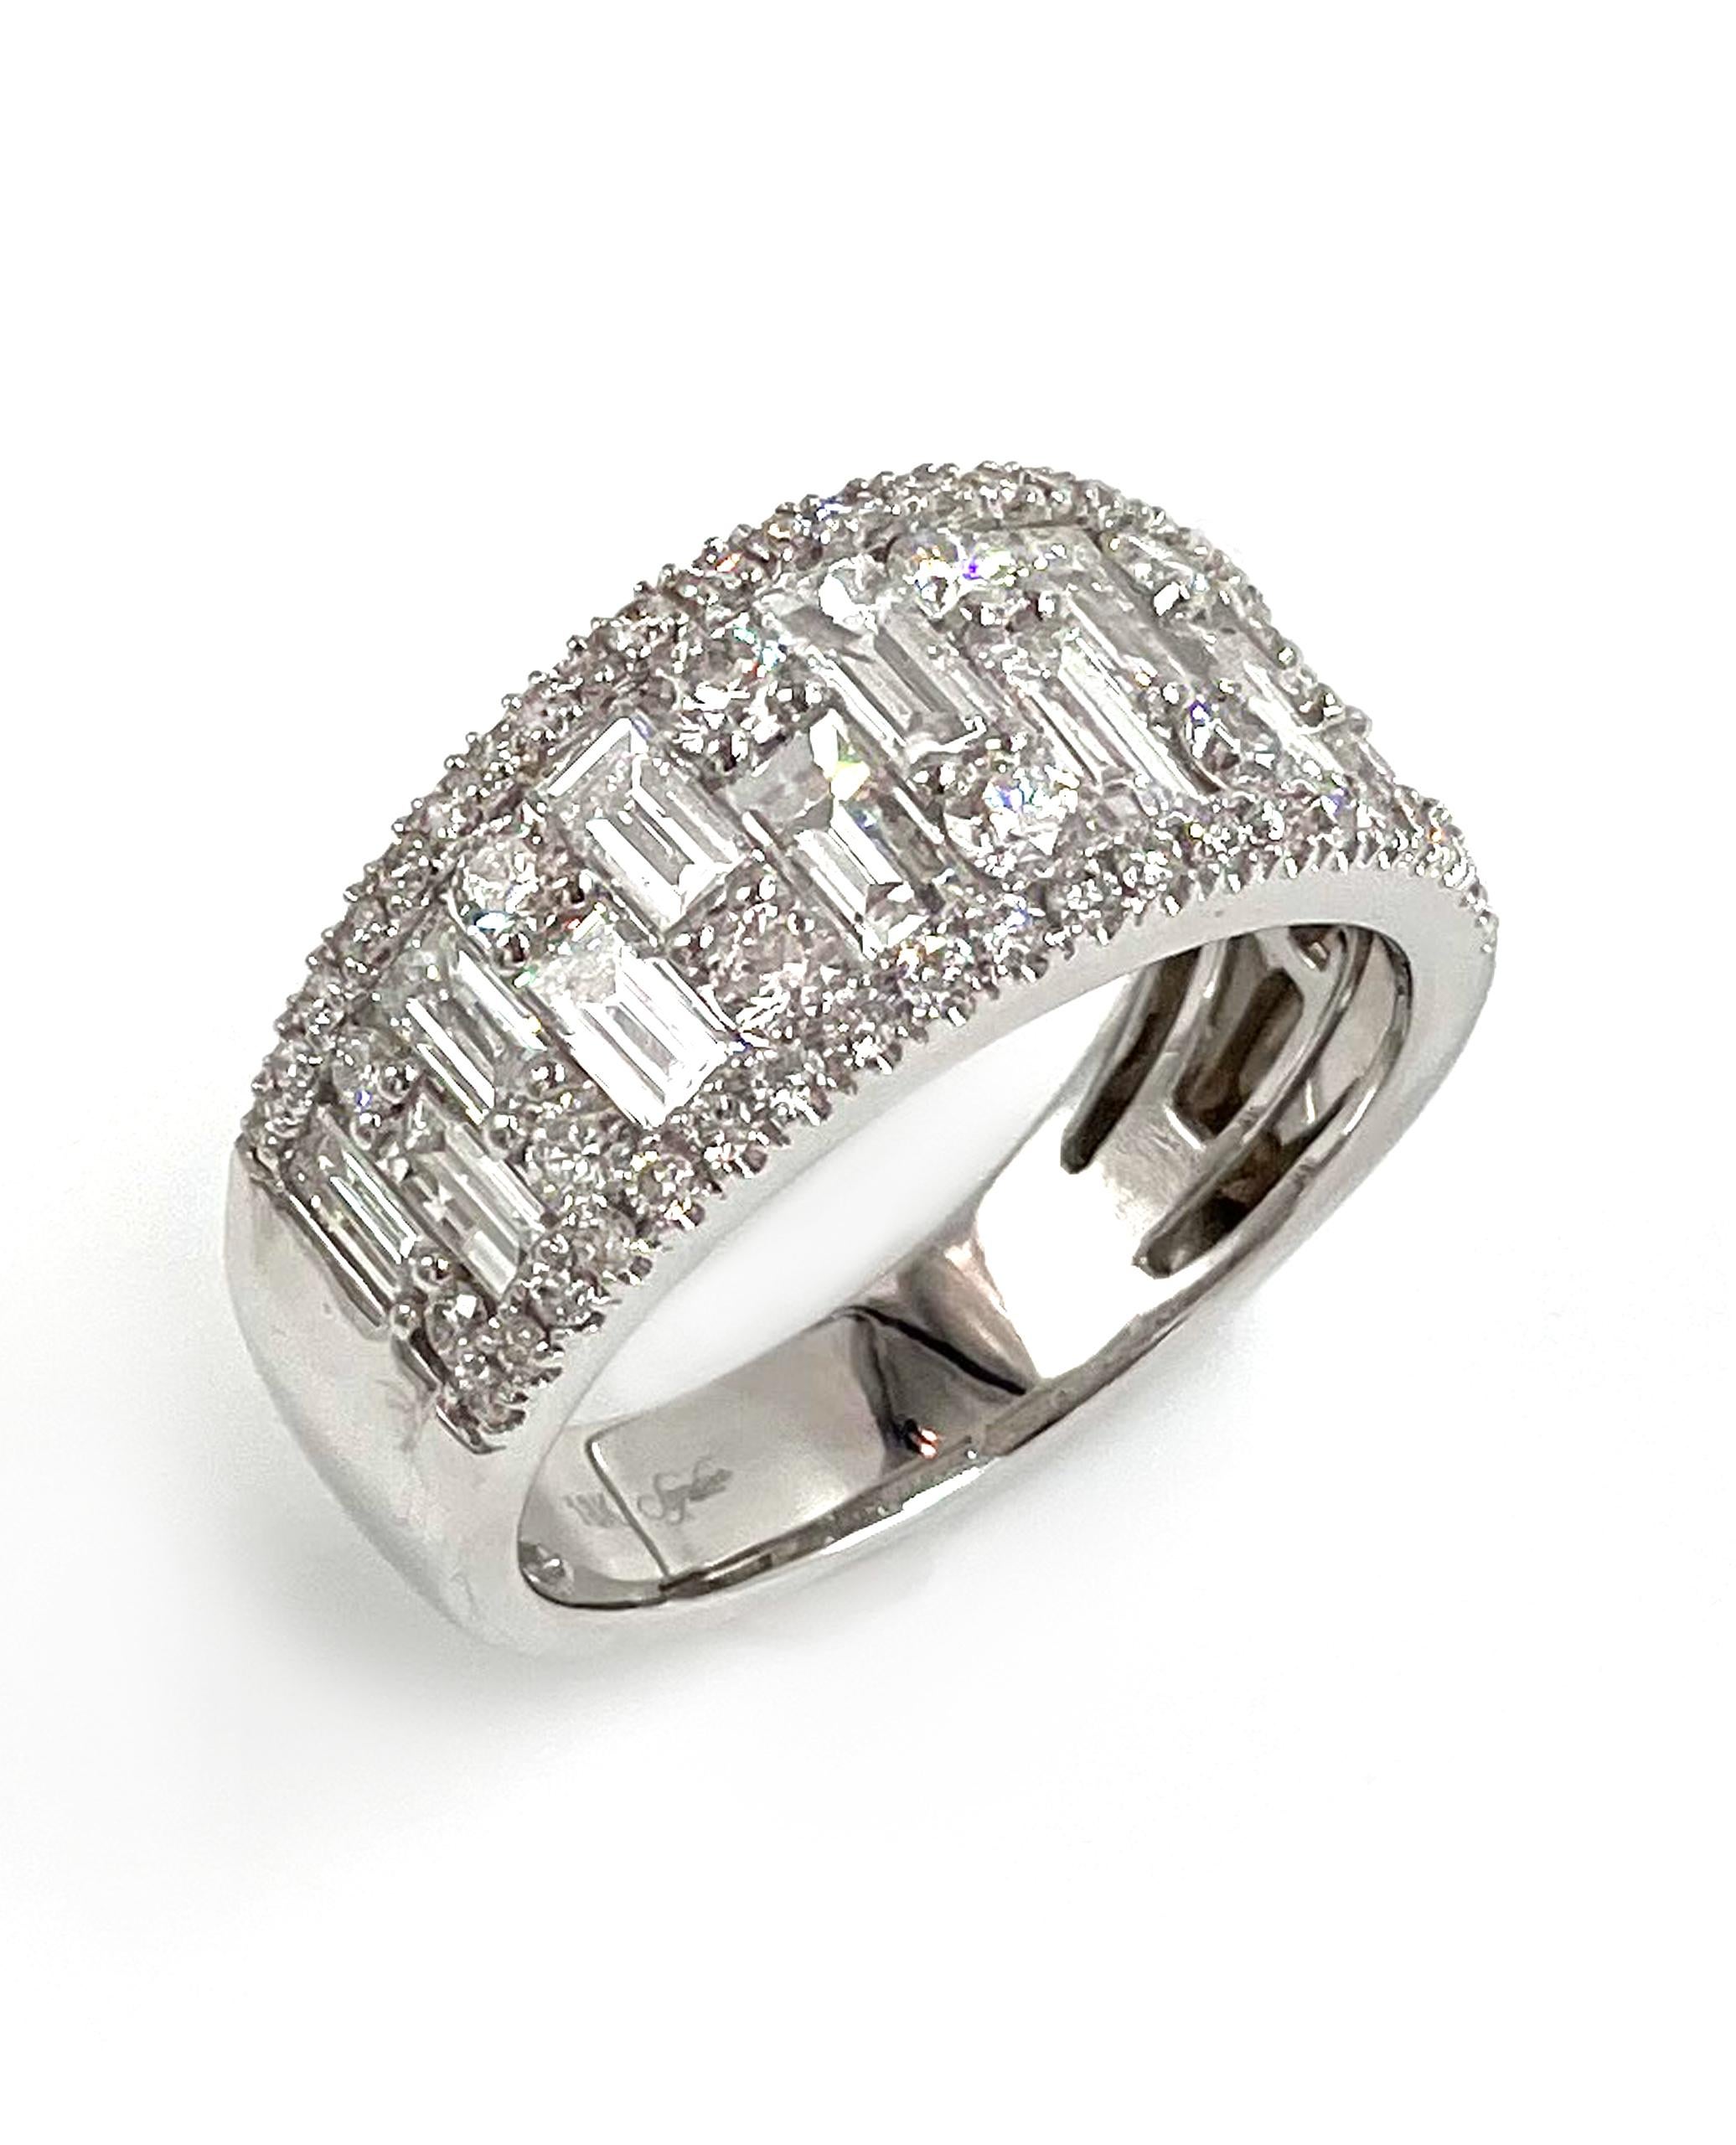 18K white gold ring with round and baguette diamonds 2.23 carats total weight. G/H color, VS2 clarity.

* Finger Size: 7